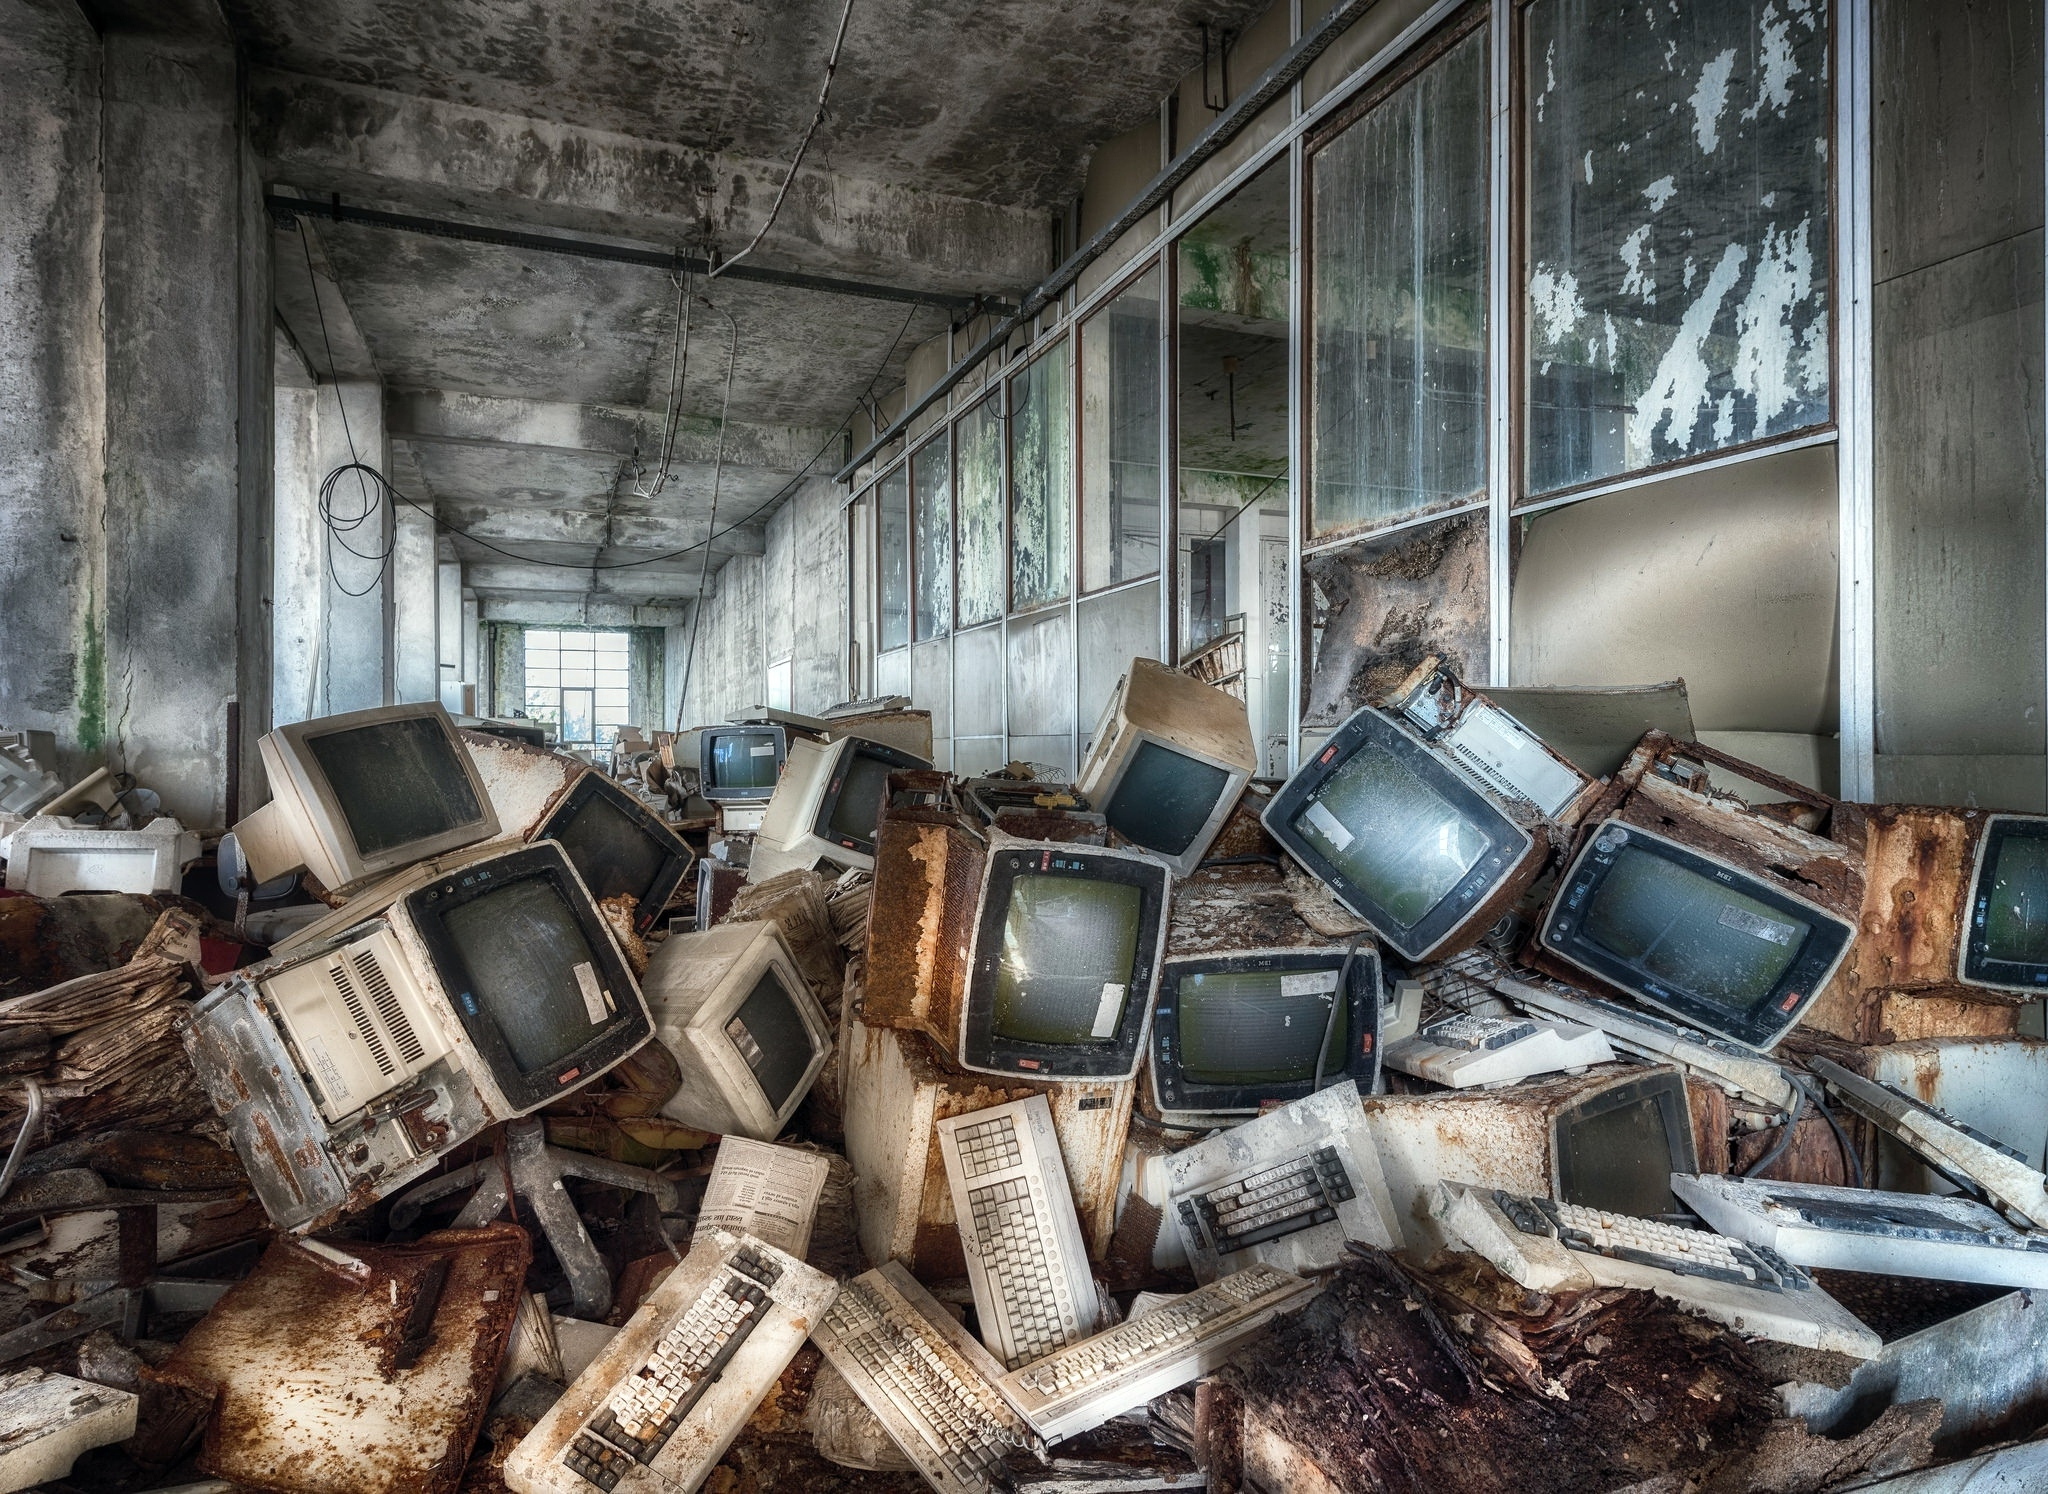 2048x1494 Wallpaper Old Computers, Abandoned Building Resolution: Wallpx